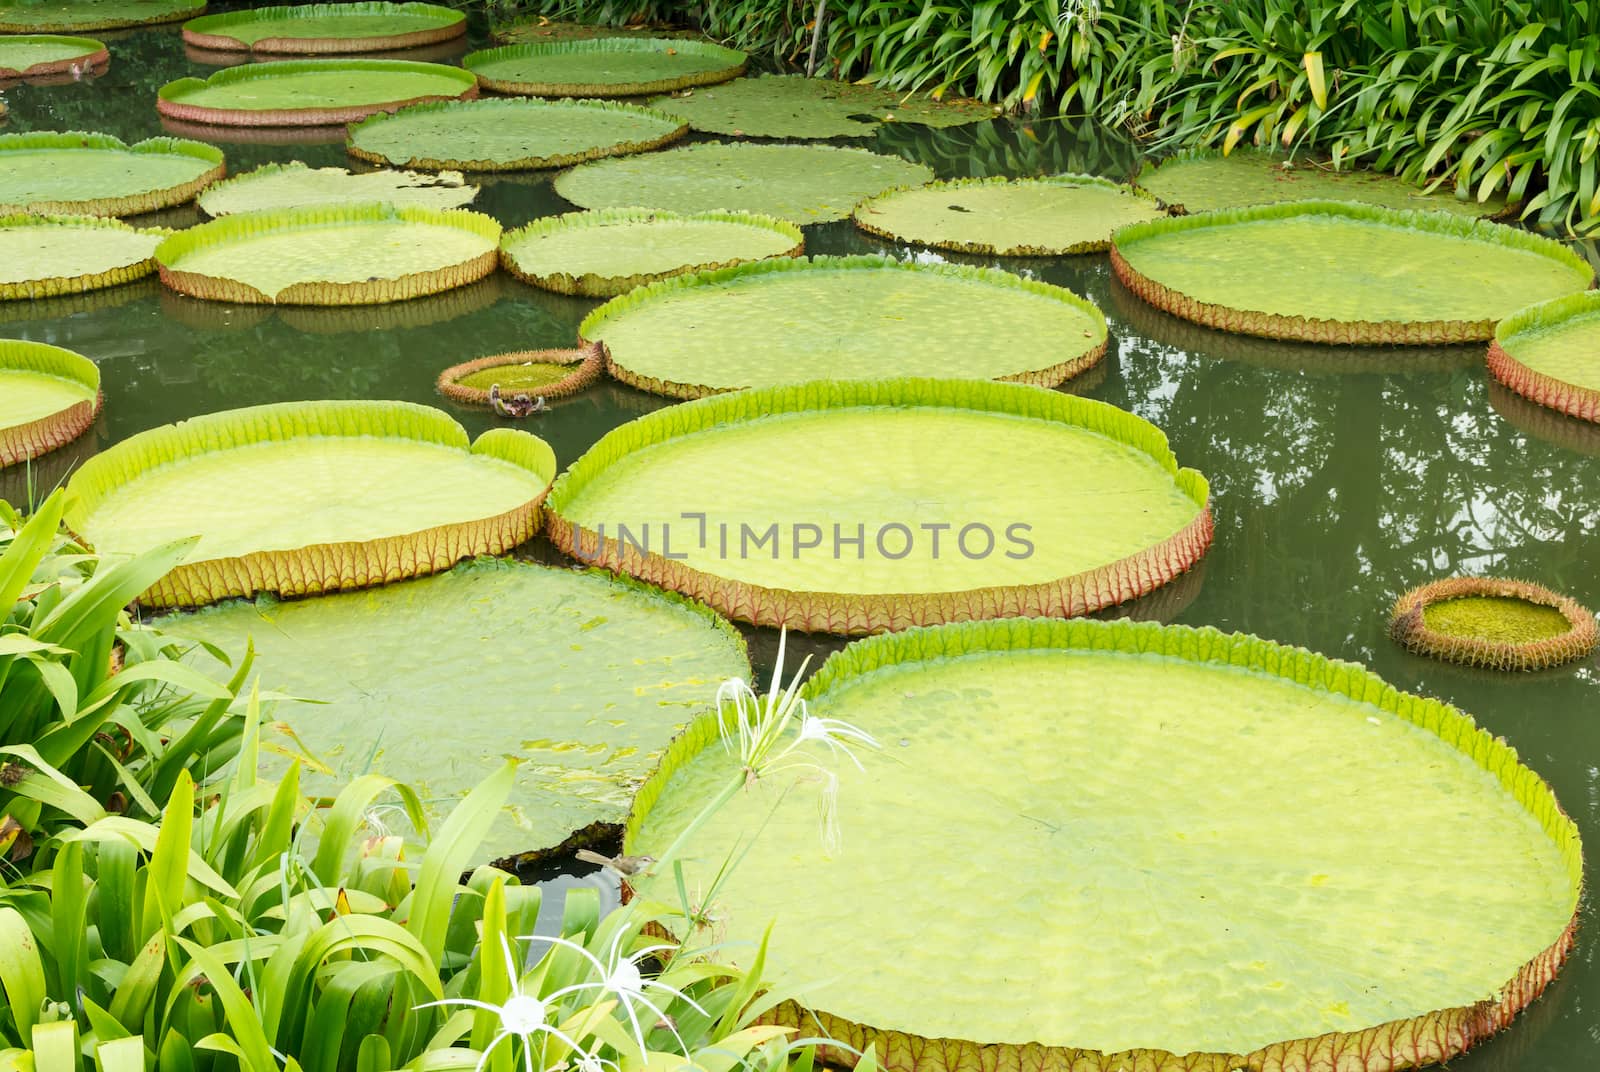  Victoria waterlily leaves by vitawin